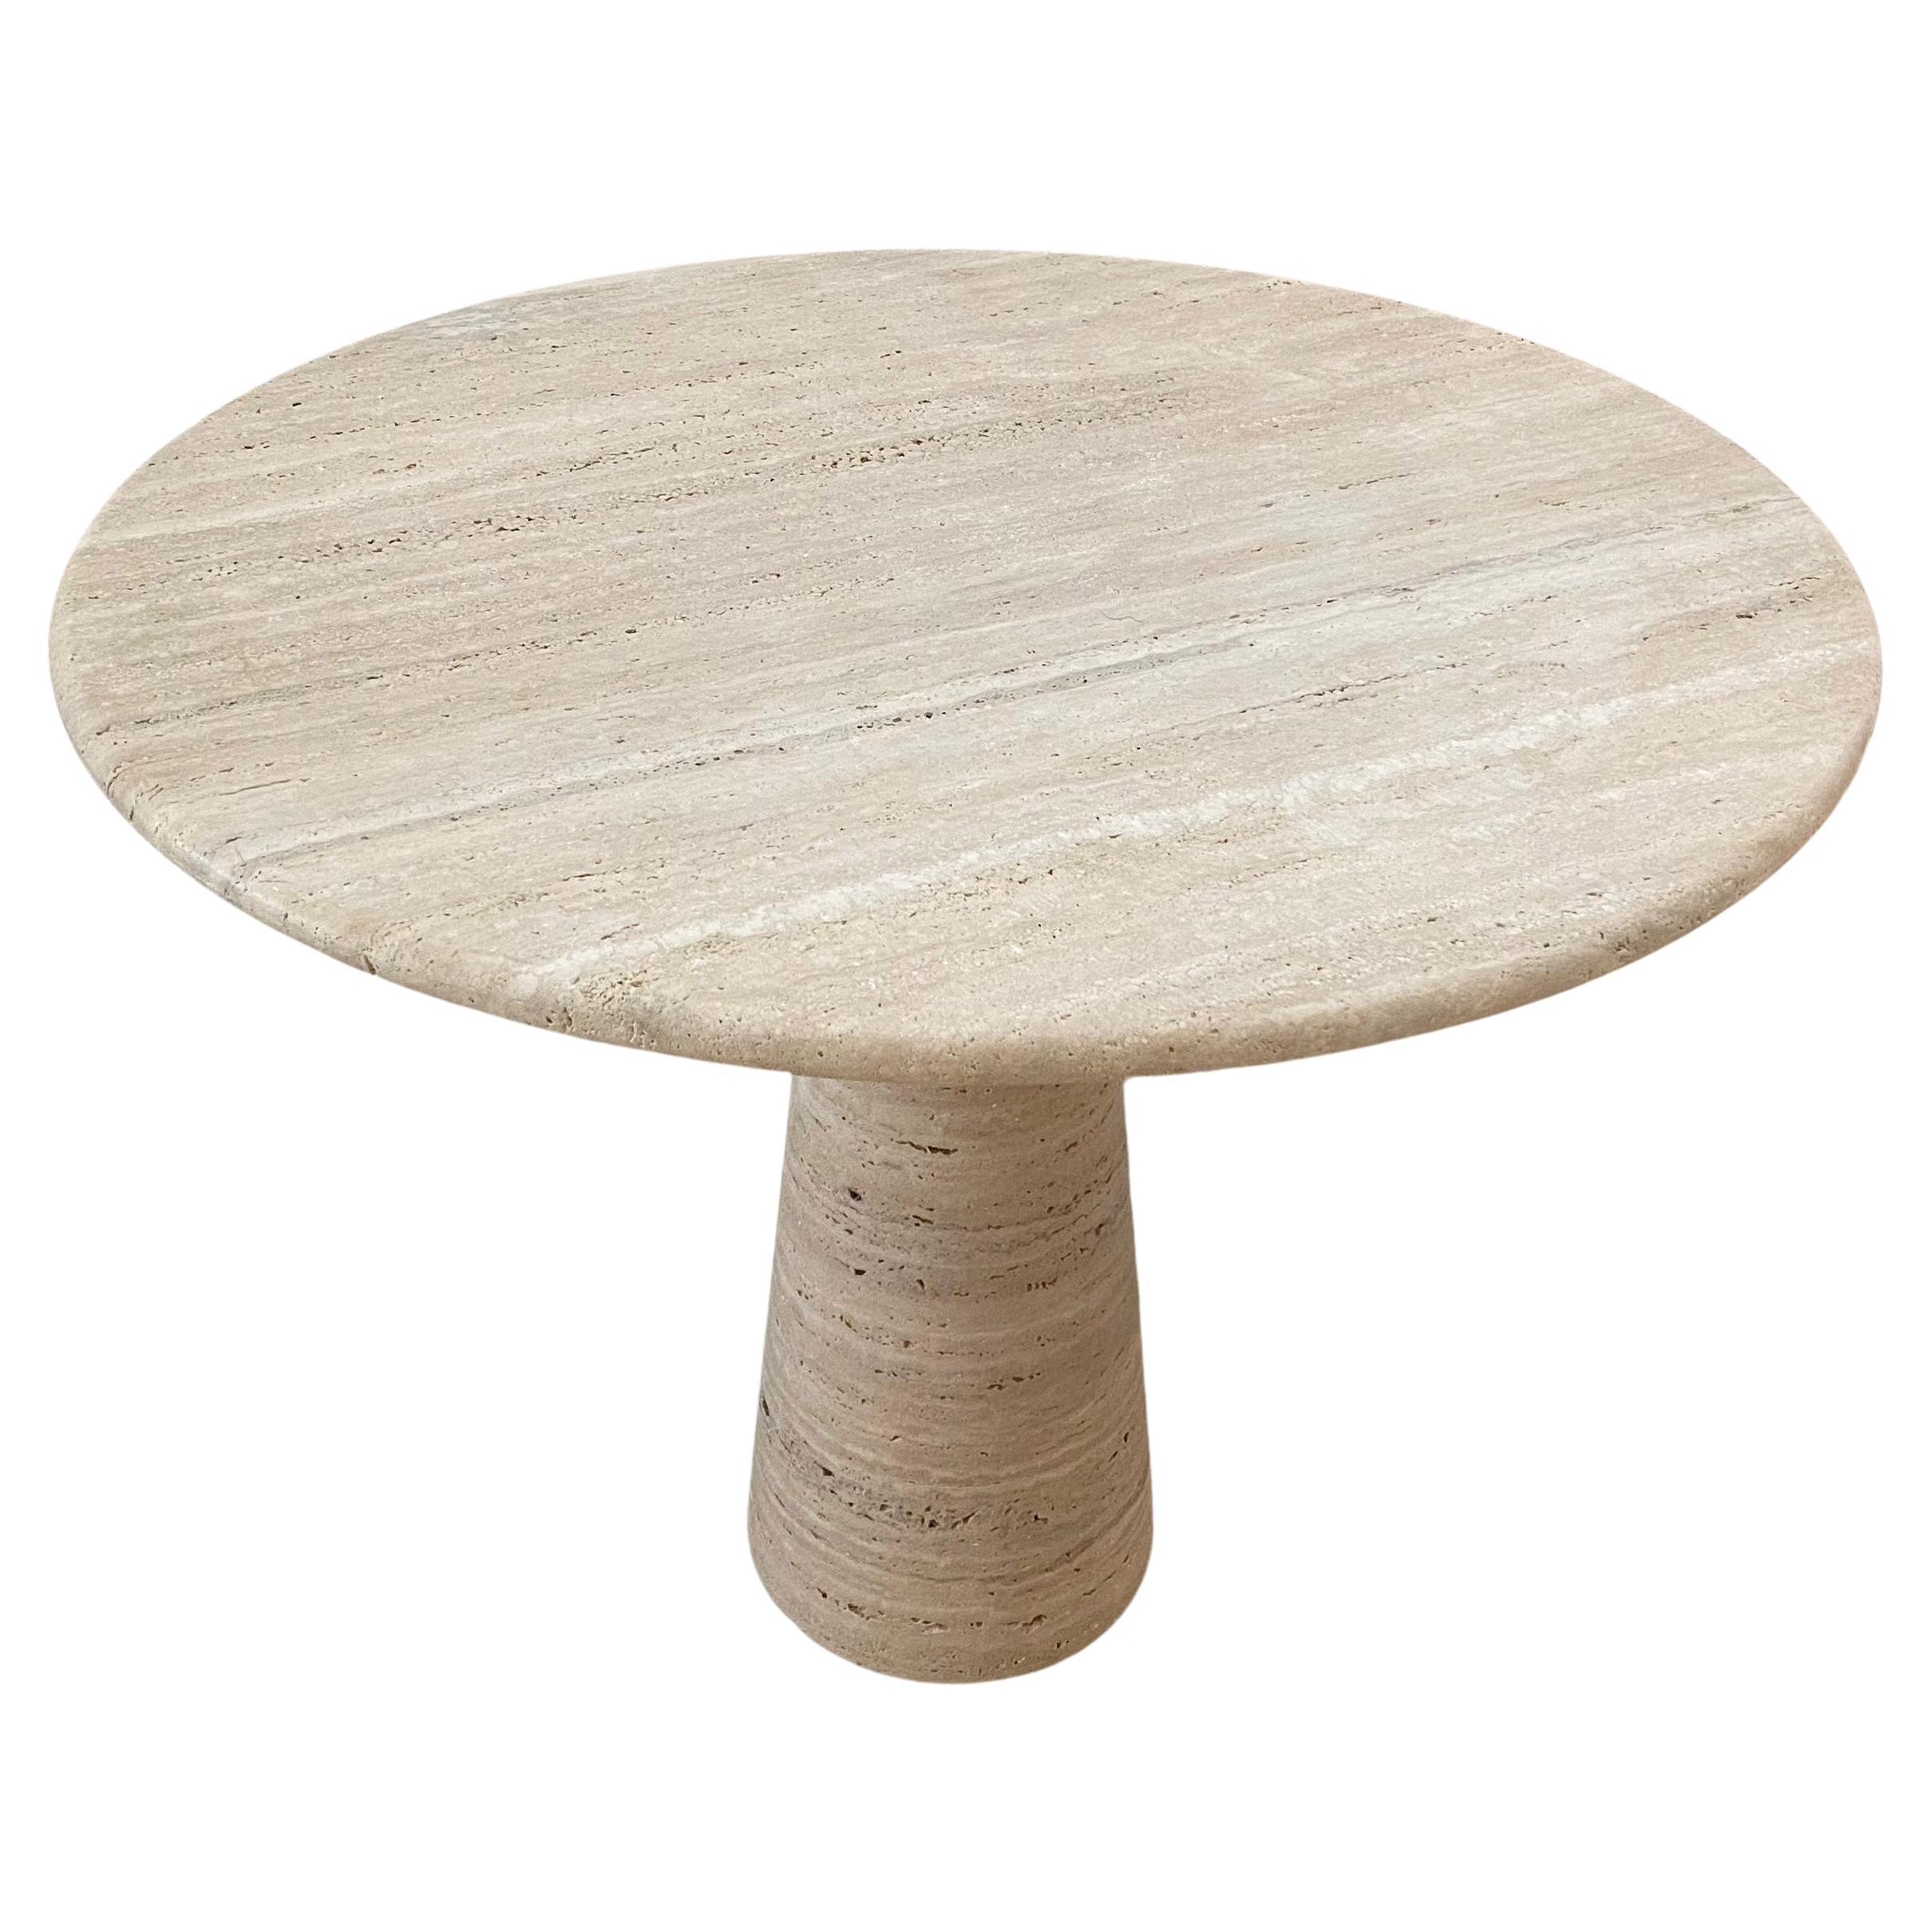 Bespoke Round Italian Dining Table in Travertine For Sale